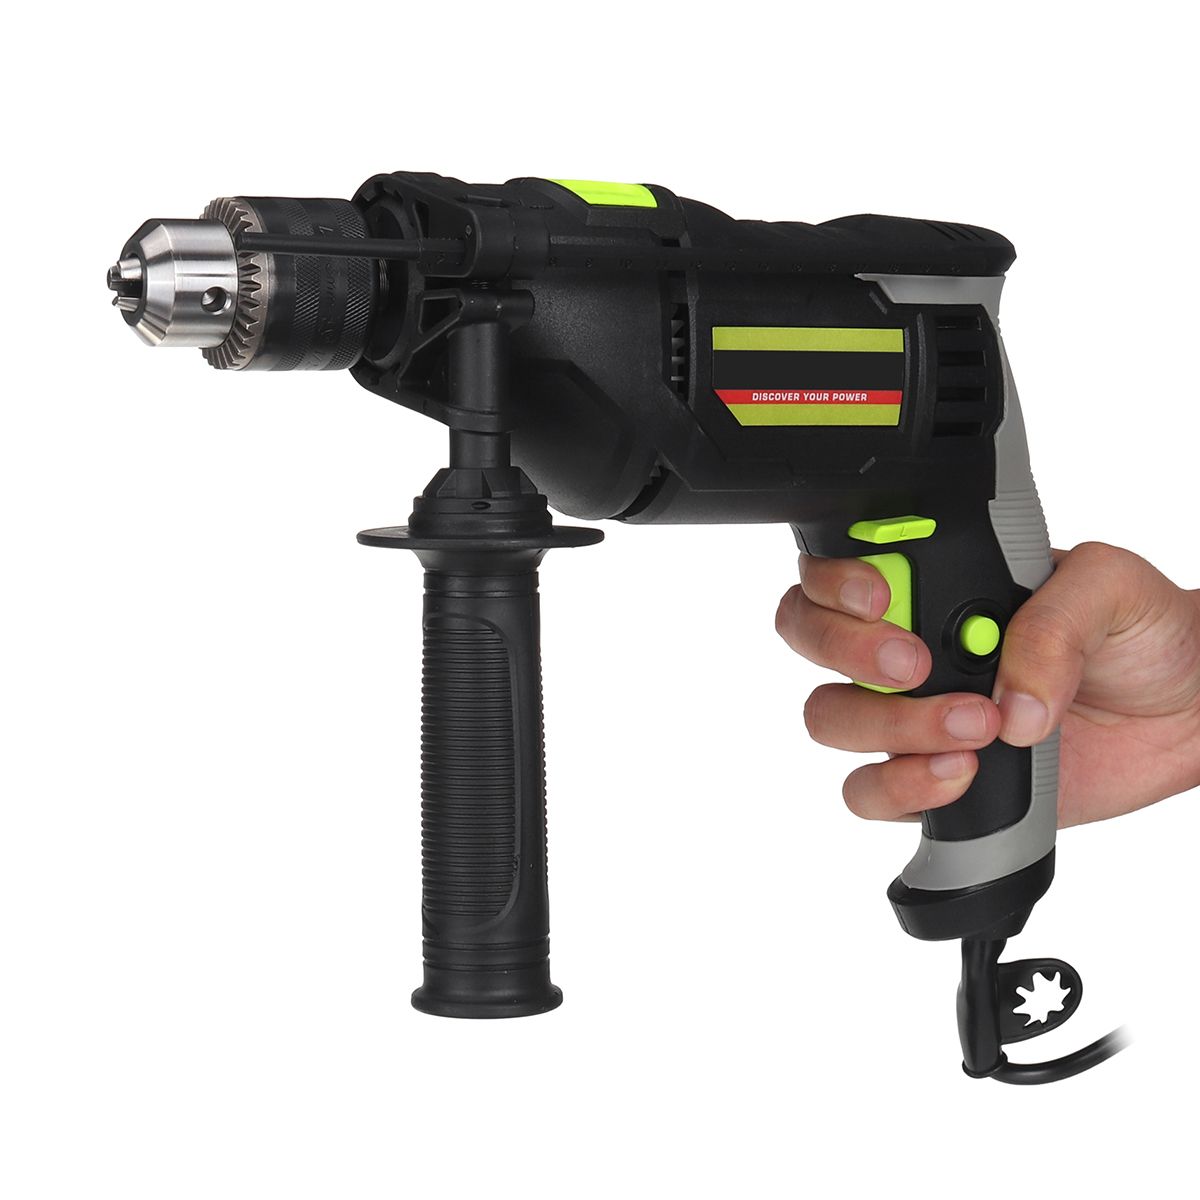 220V-710W-Electric-Impact-Drill-Rotary-Hammer-Concrete-Punch-Chisel-Driver-Hand-Tools-1736353